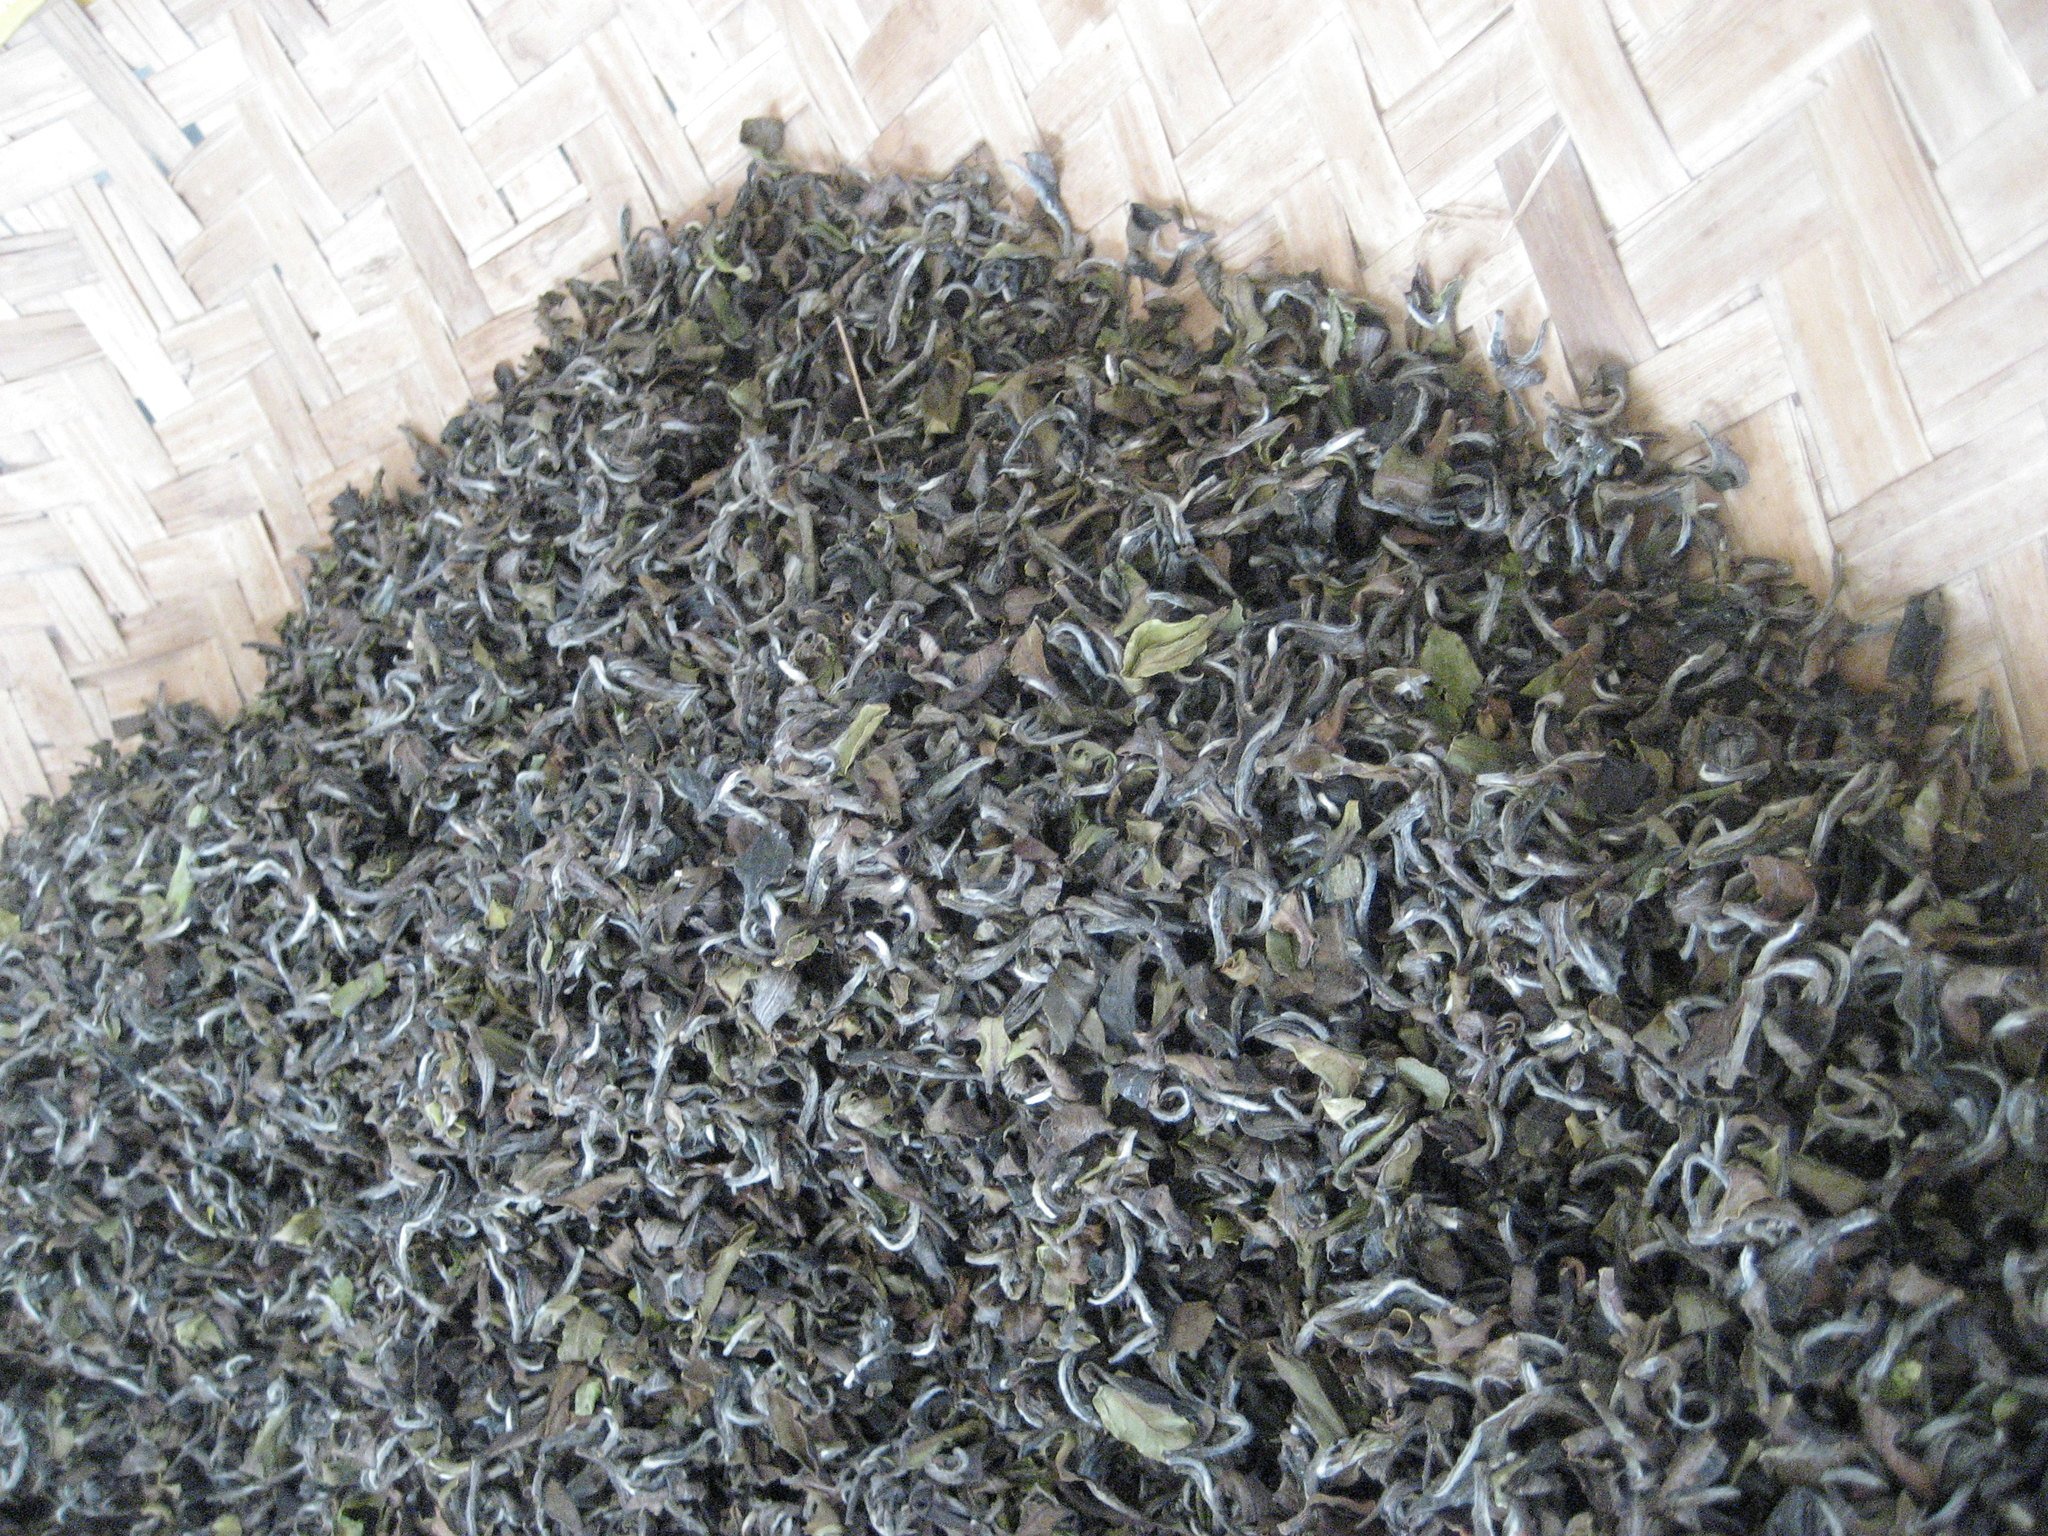 Up Close on Finished Dongfang Mei Ren oolong tea